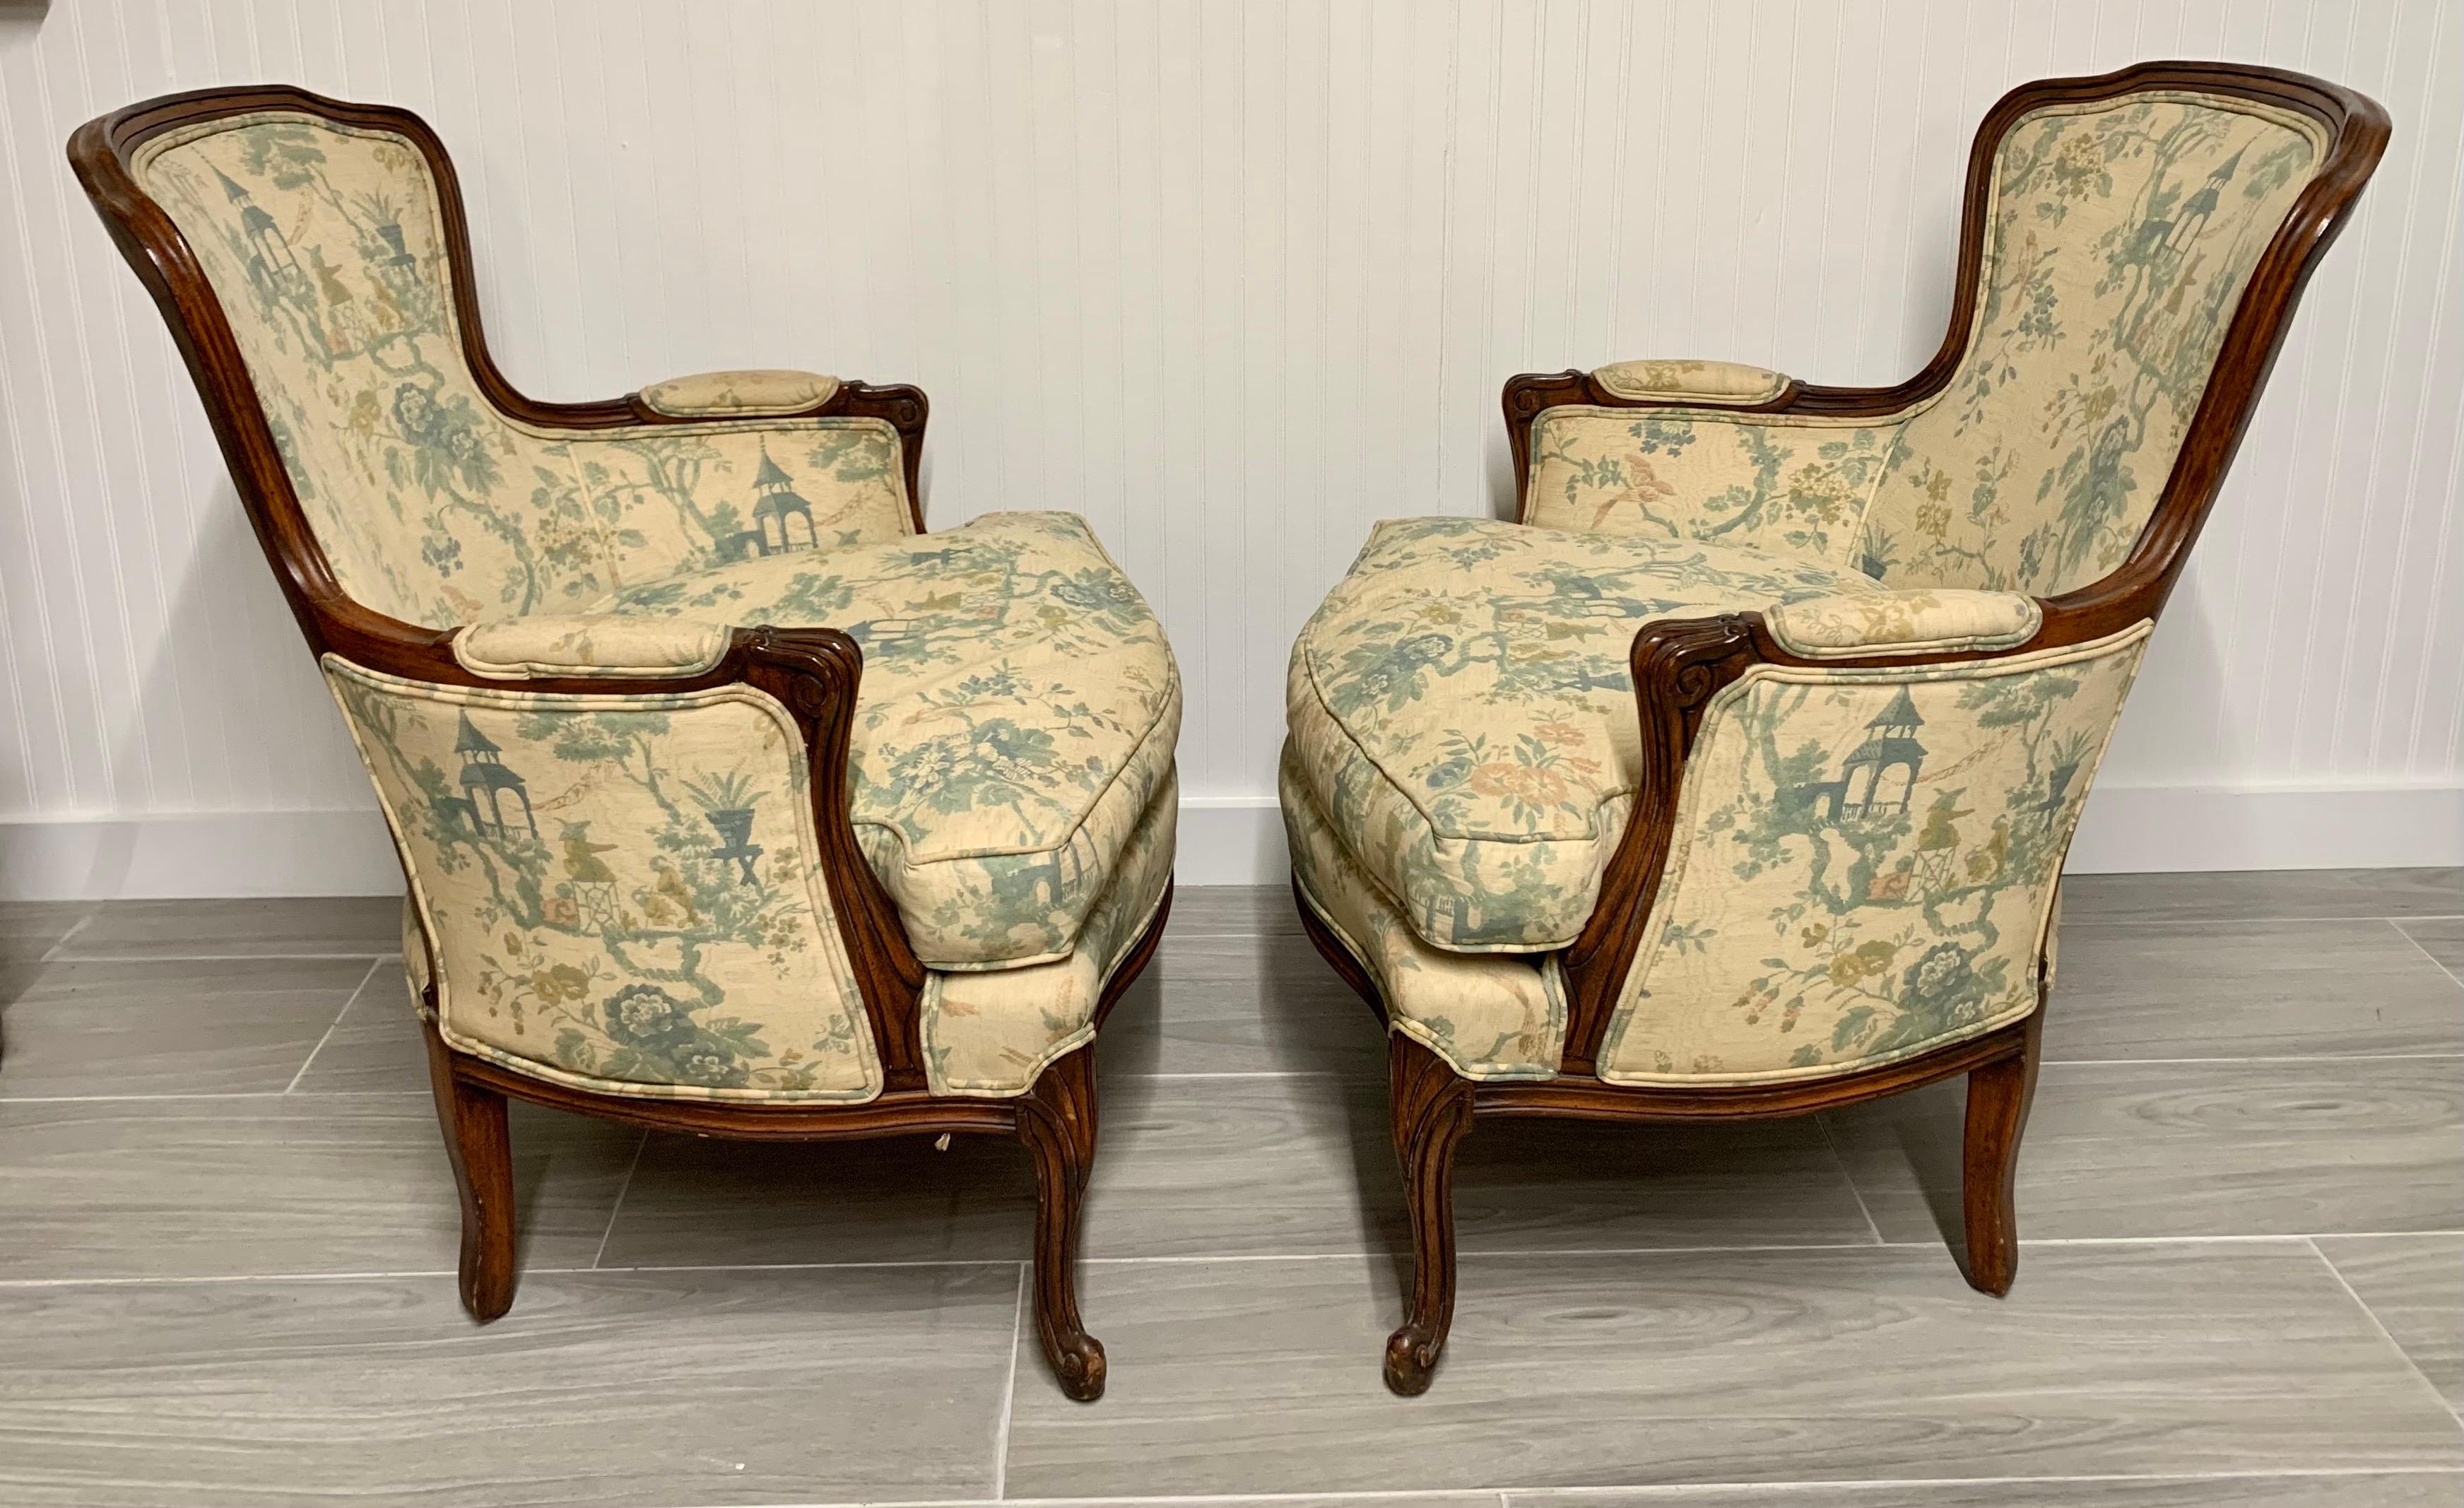 Elegant French bergeres with carved walnut frames and chionoiserie style upholstery. Loose down seat cushion.